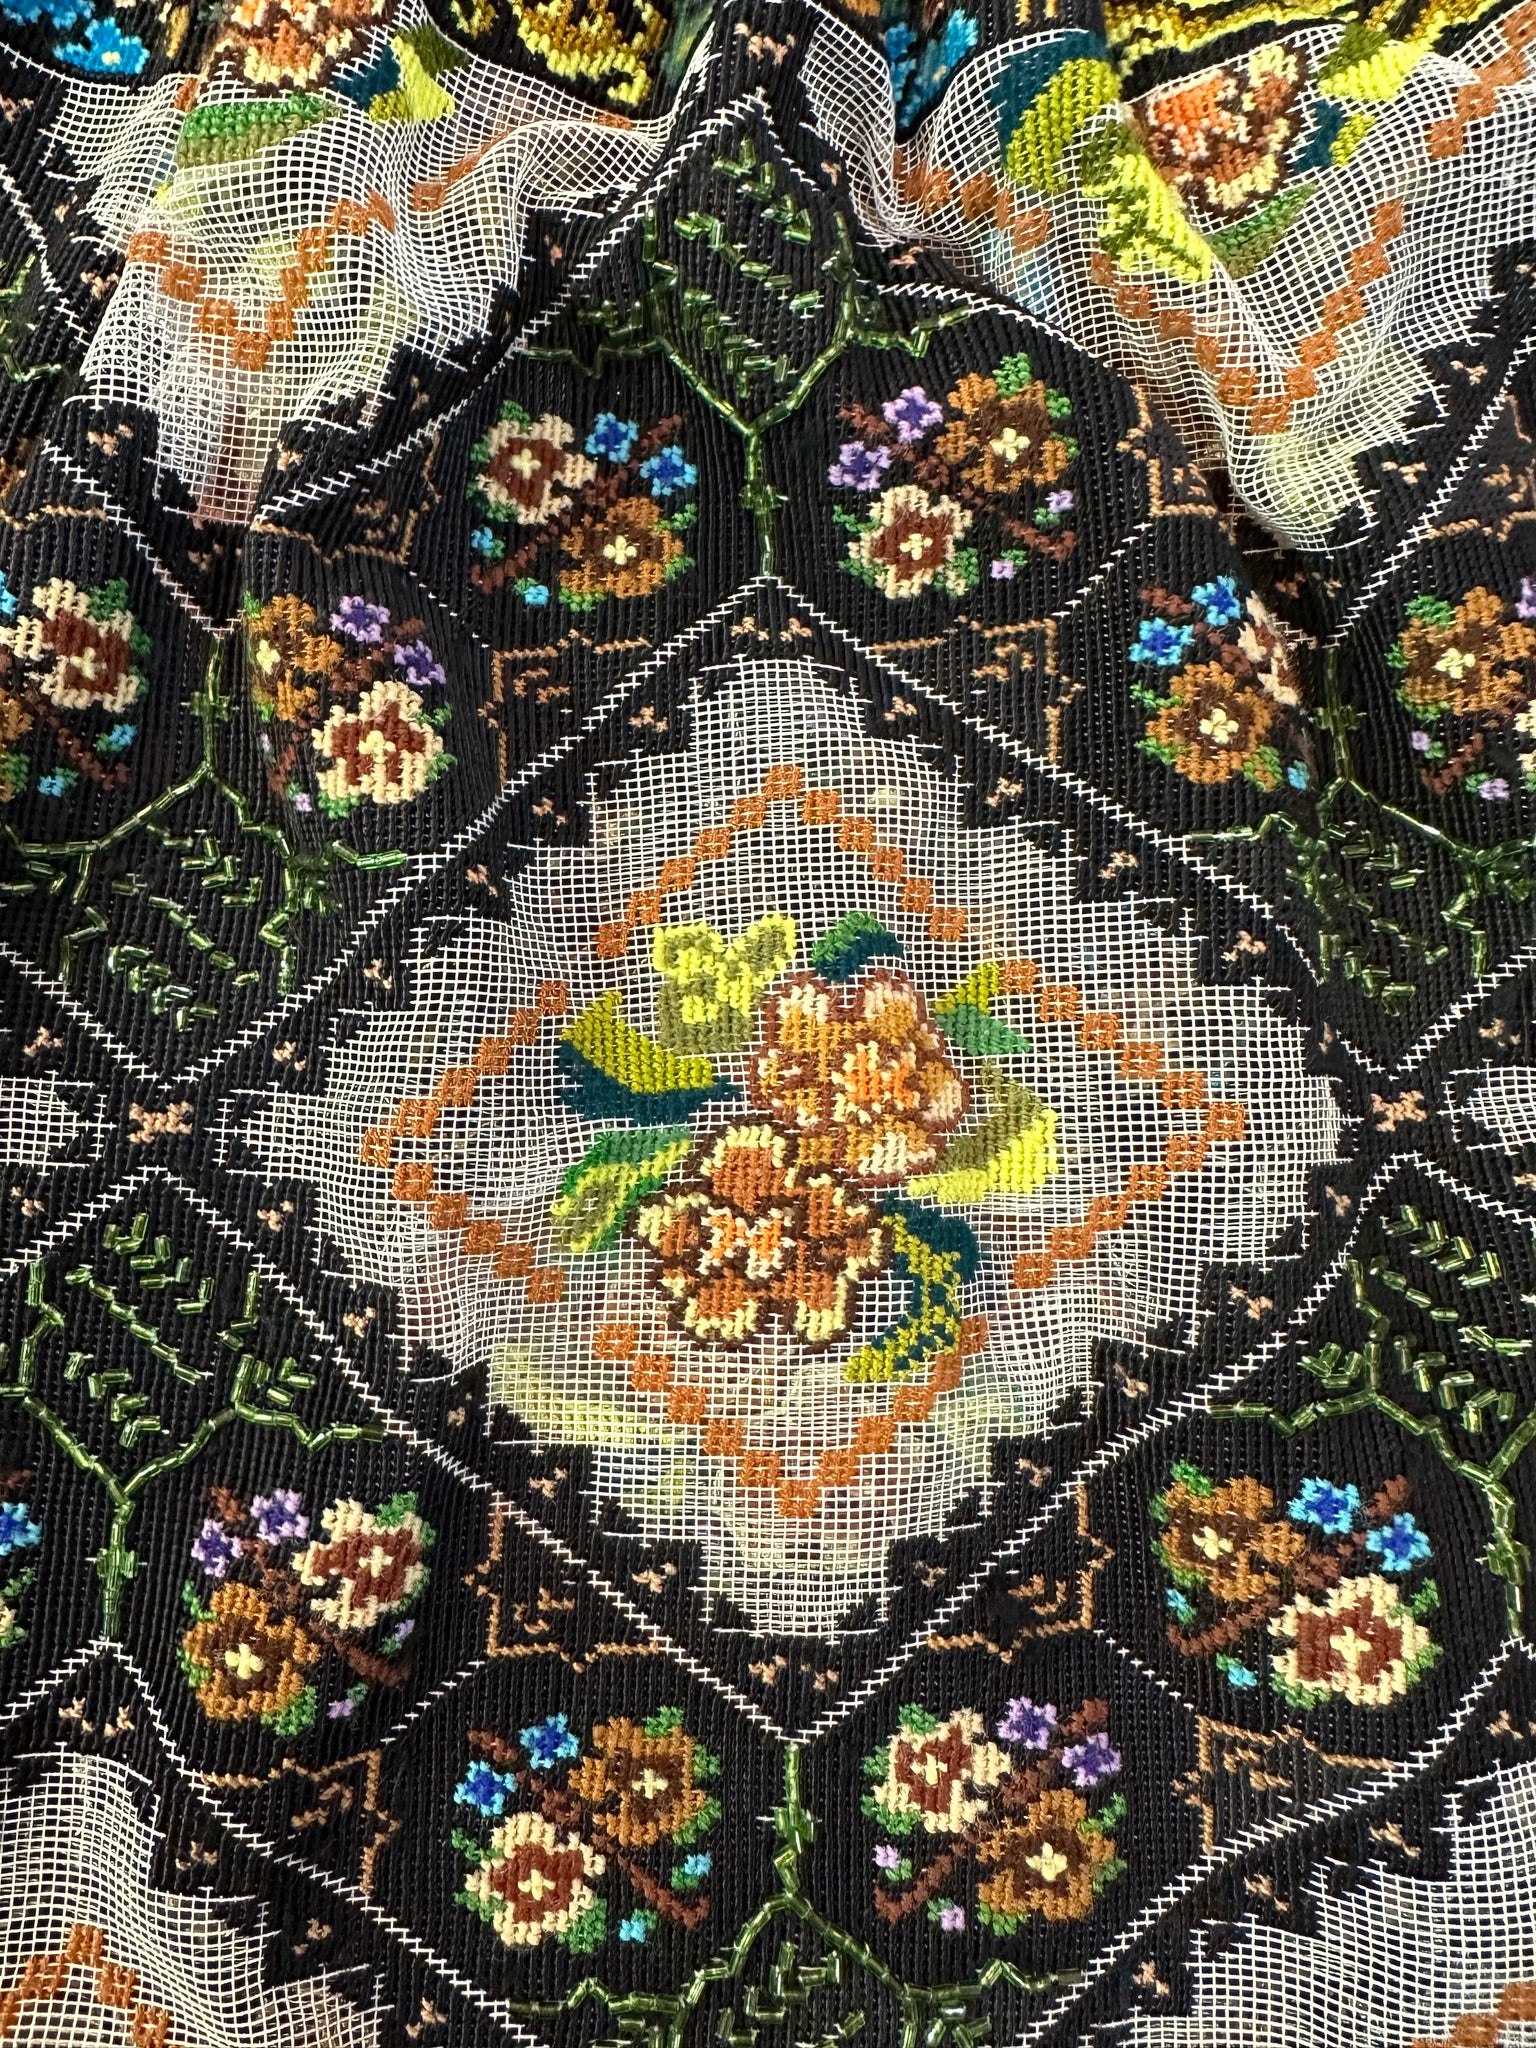  Hungarian Contemporary Embroidered Folk Blouse DETAIL 5 of 5